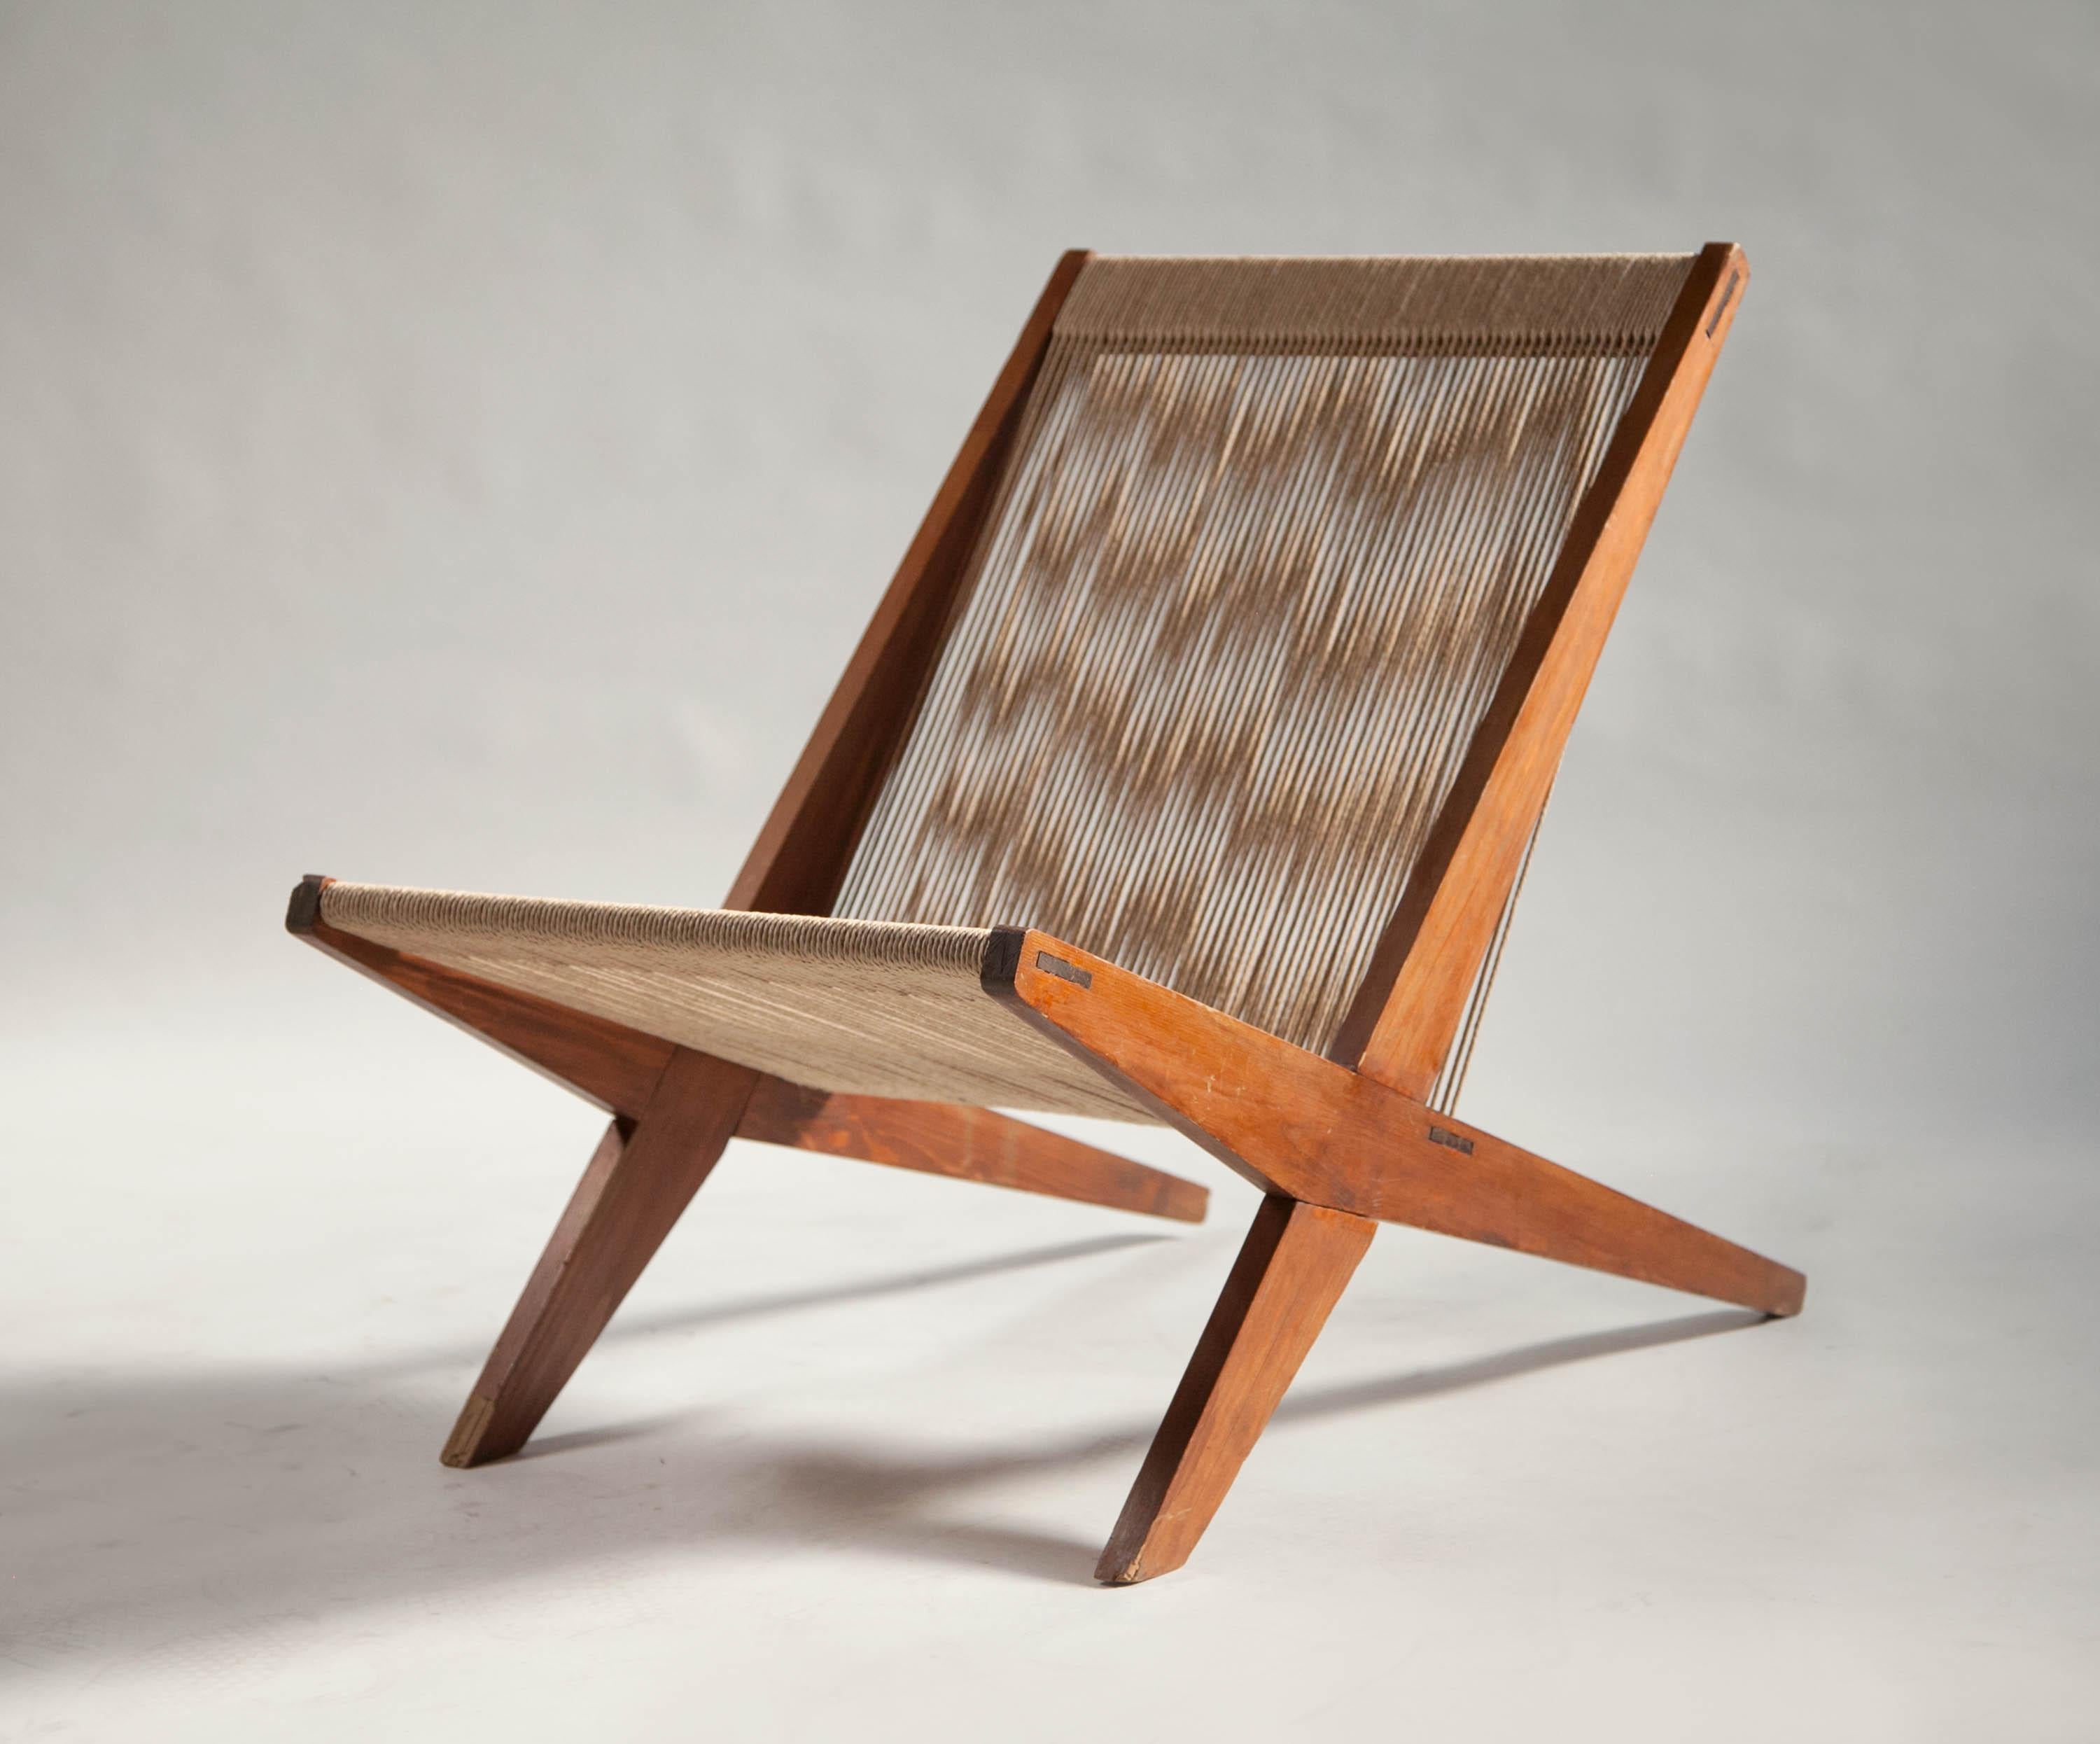 Rope chair in pine - attributed to Poul Kjaerholm & Jørgen Høj, Denmark 1960's 

Made of stained pine wood and rope pine this curious piece is often attributed to Poul Kjærholm & Jørgen Høj for Thorald Madsen Snedkeri. Though not confirmed it is